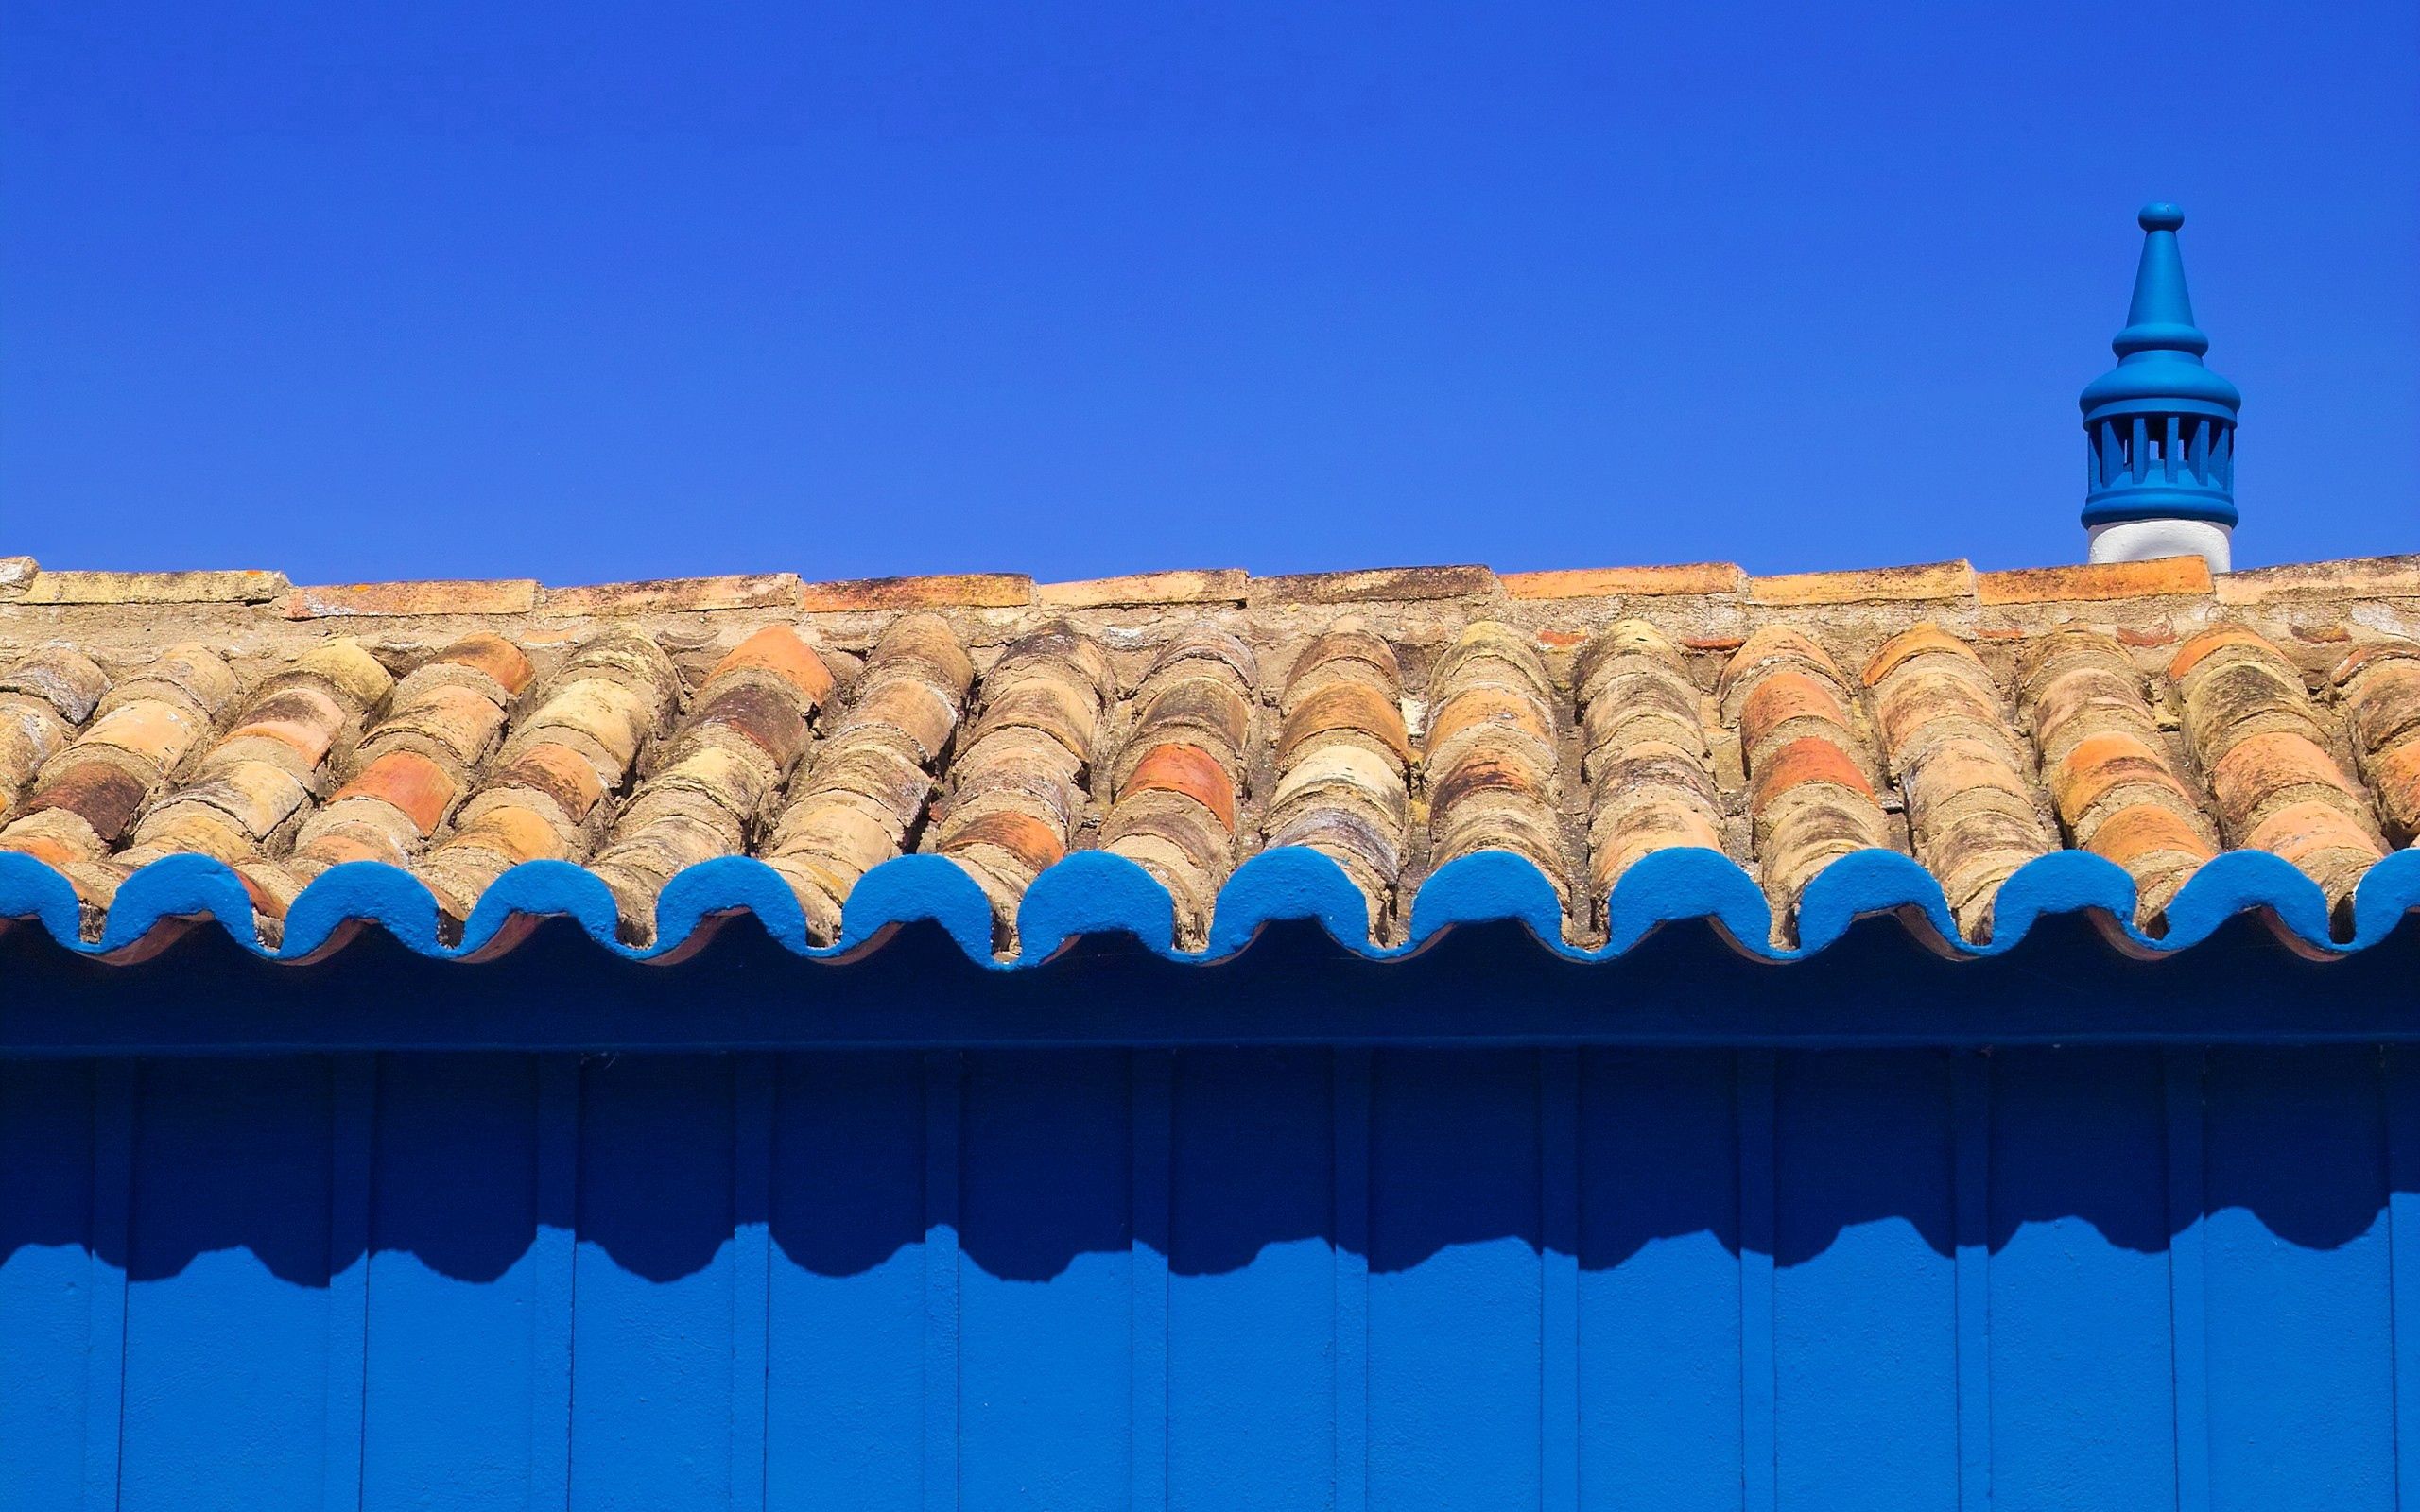 sky, miscellanea, miscellaneous, roof, coating, covering